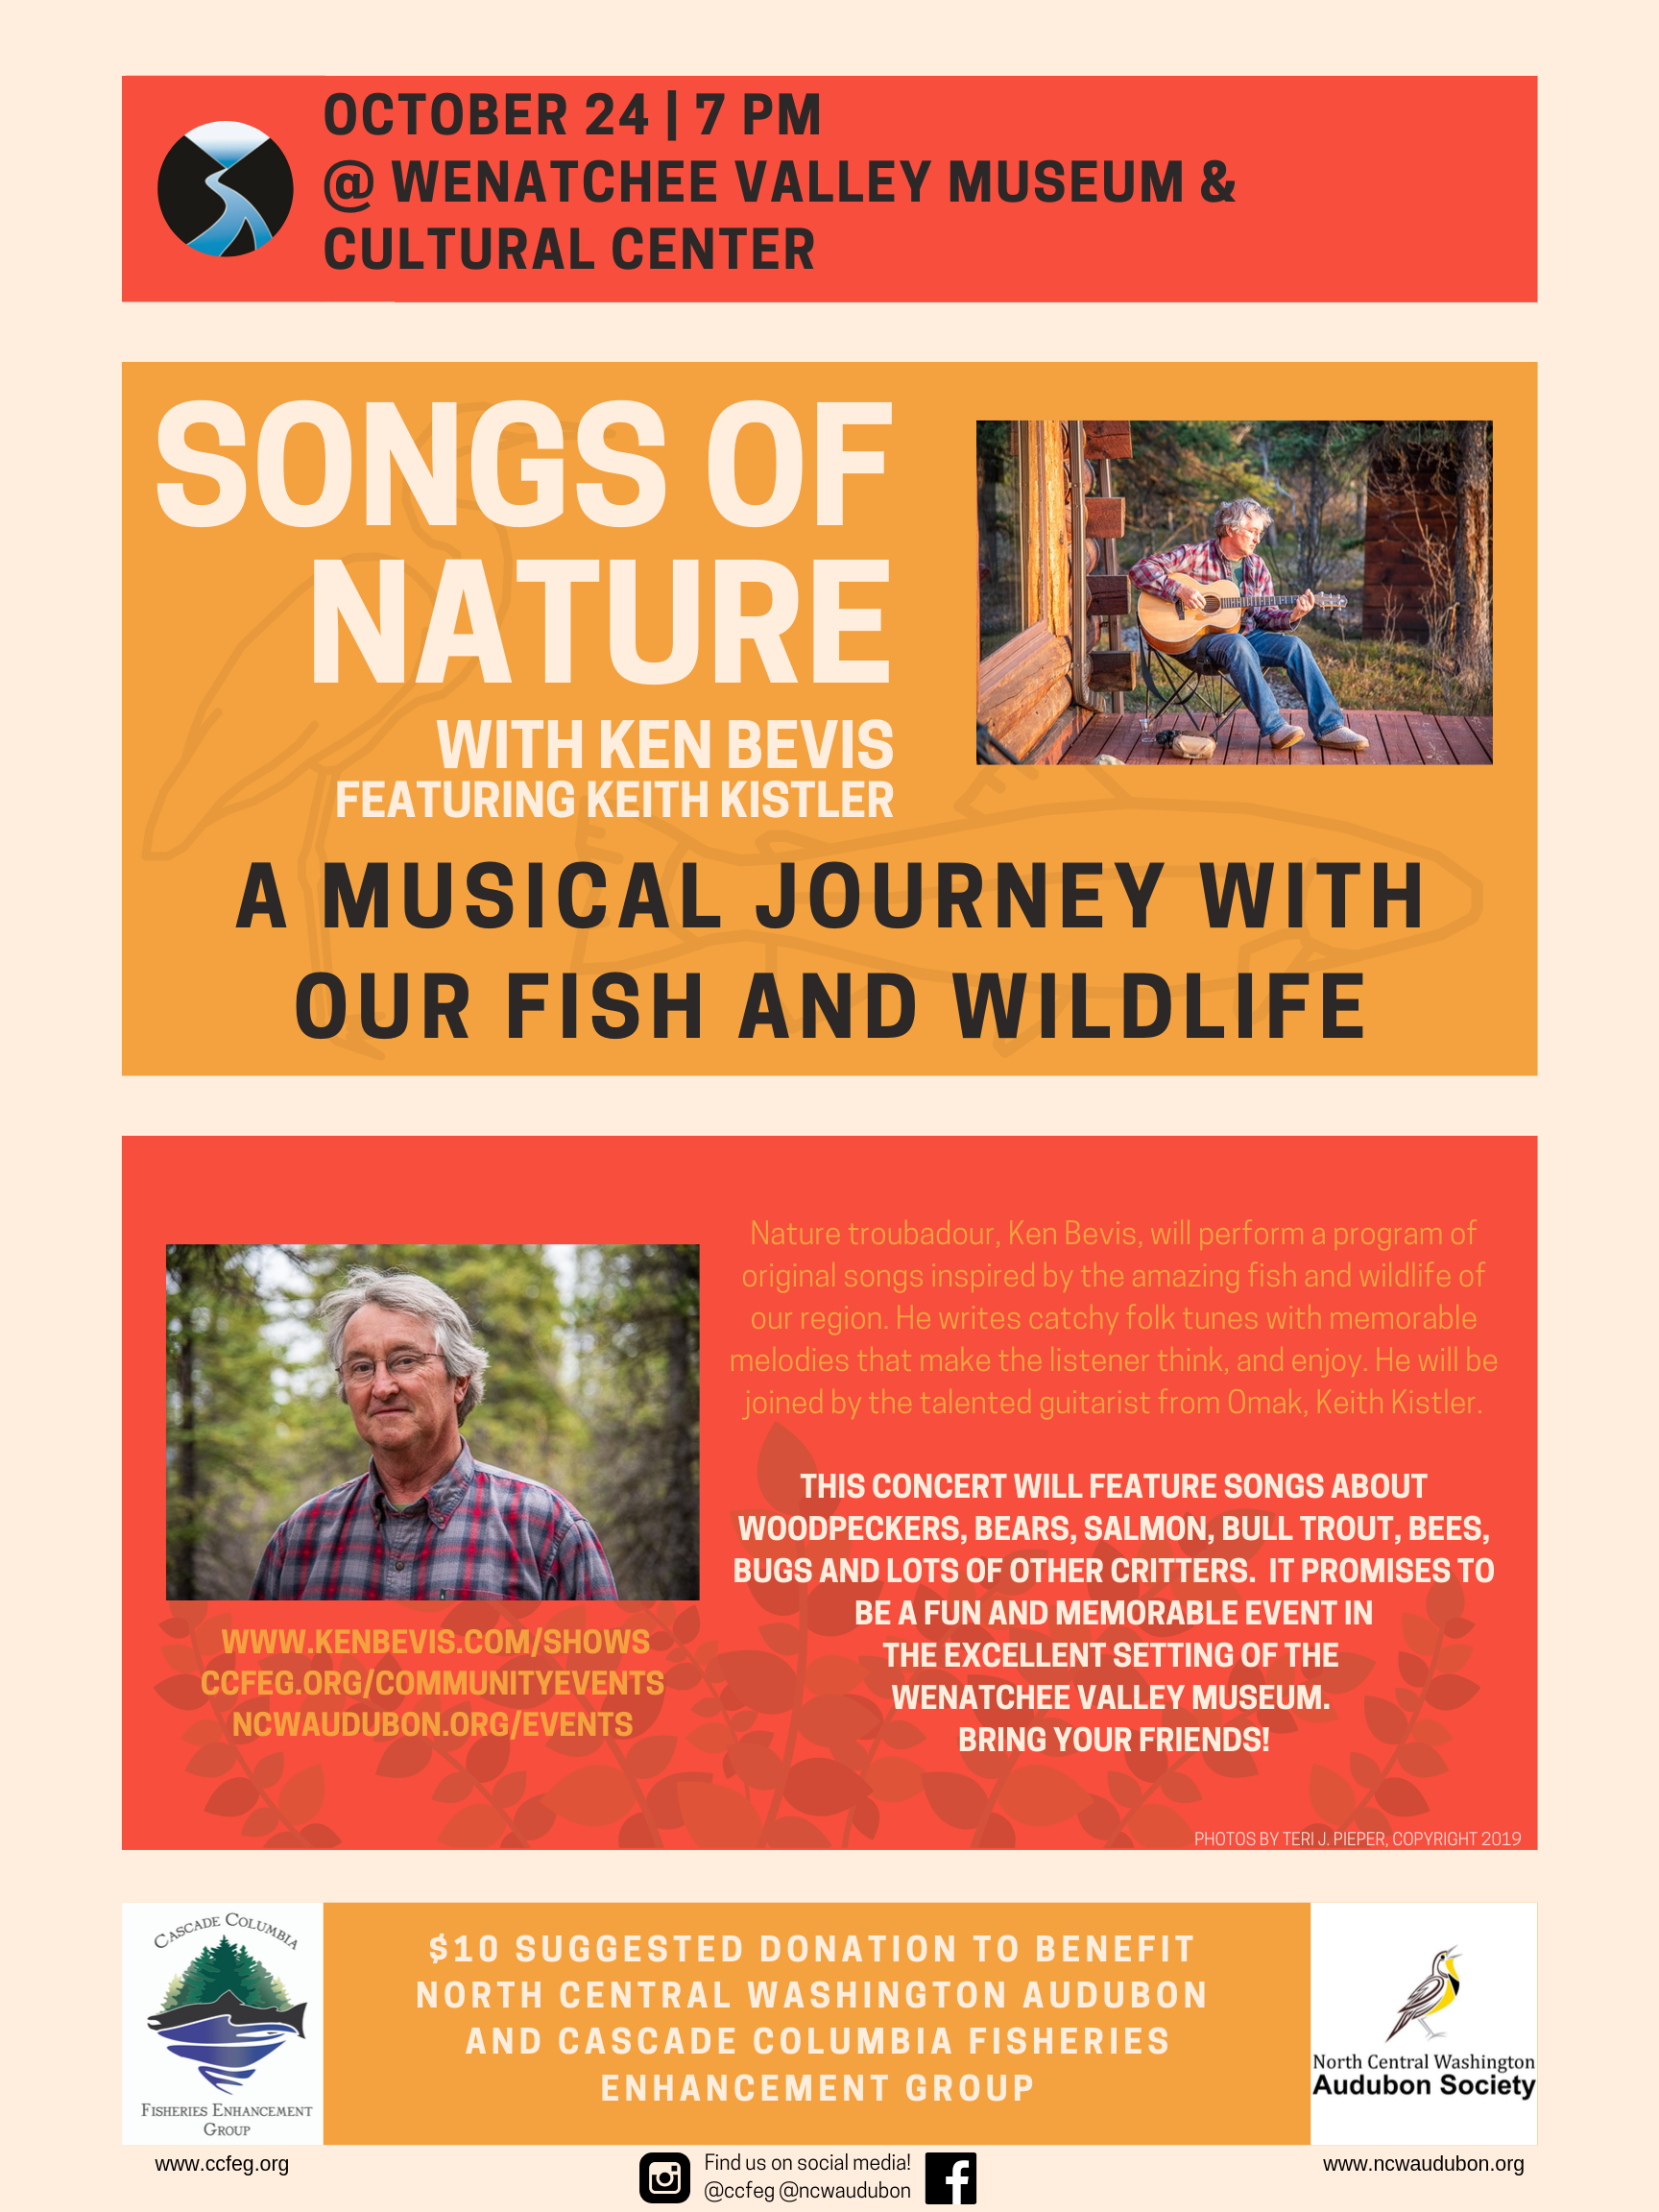 CCFEG_Songs of nature_101519.png